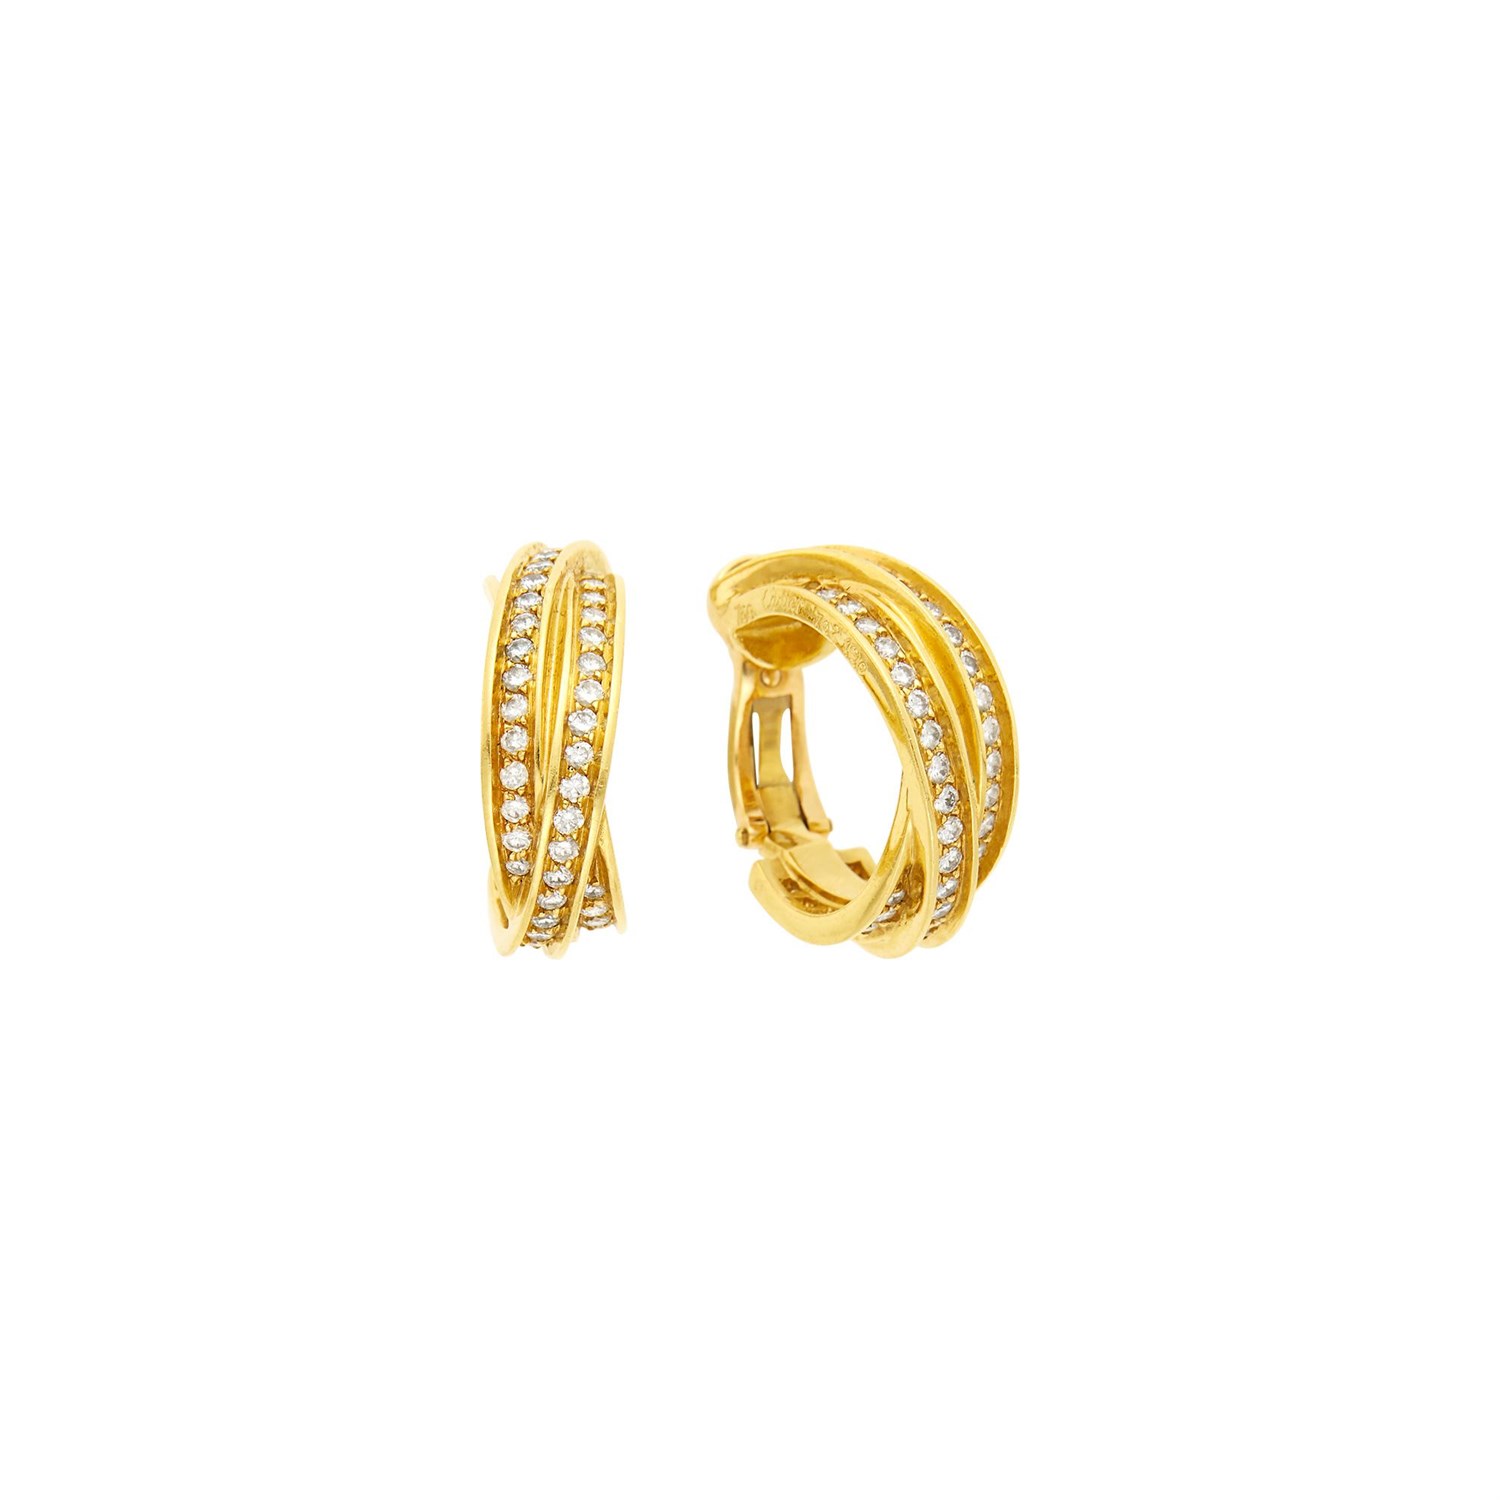 Lot 169 - Cartier Pair of Gold and Diamond 'Trinity' Hoop Earrings, France